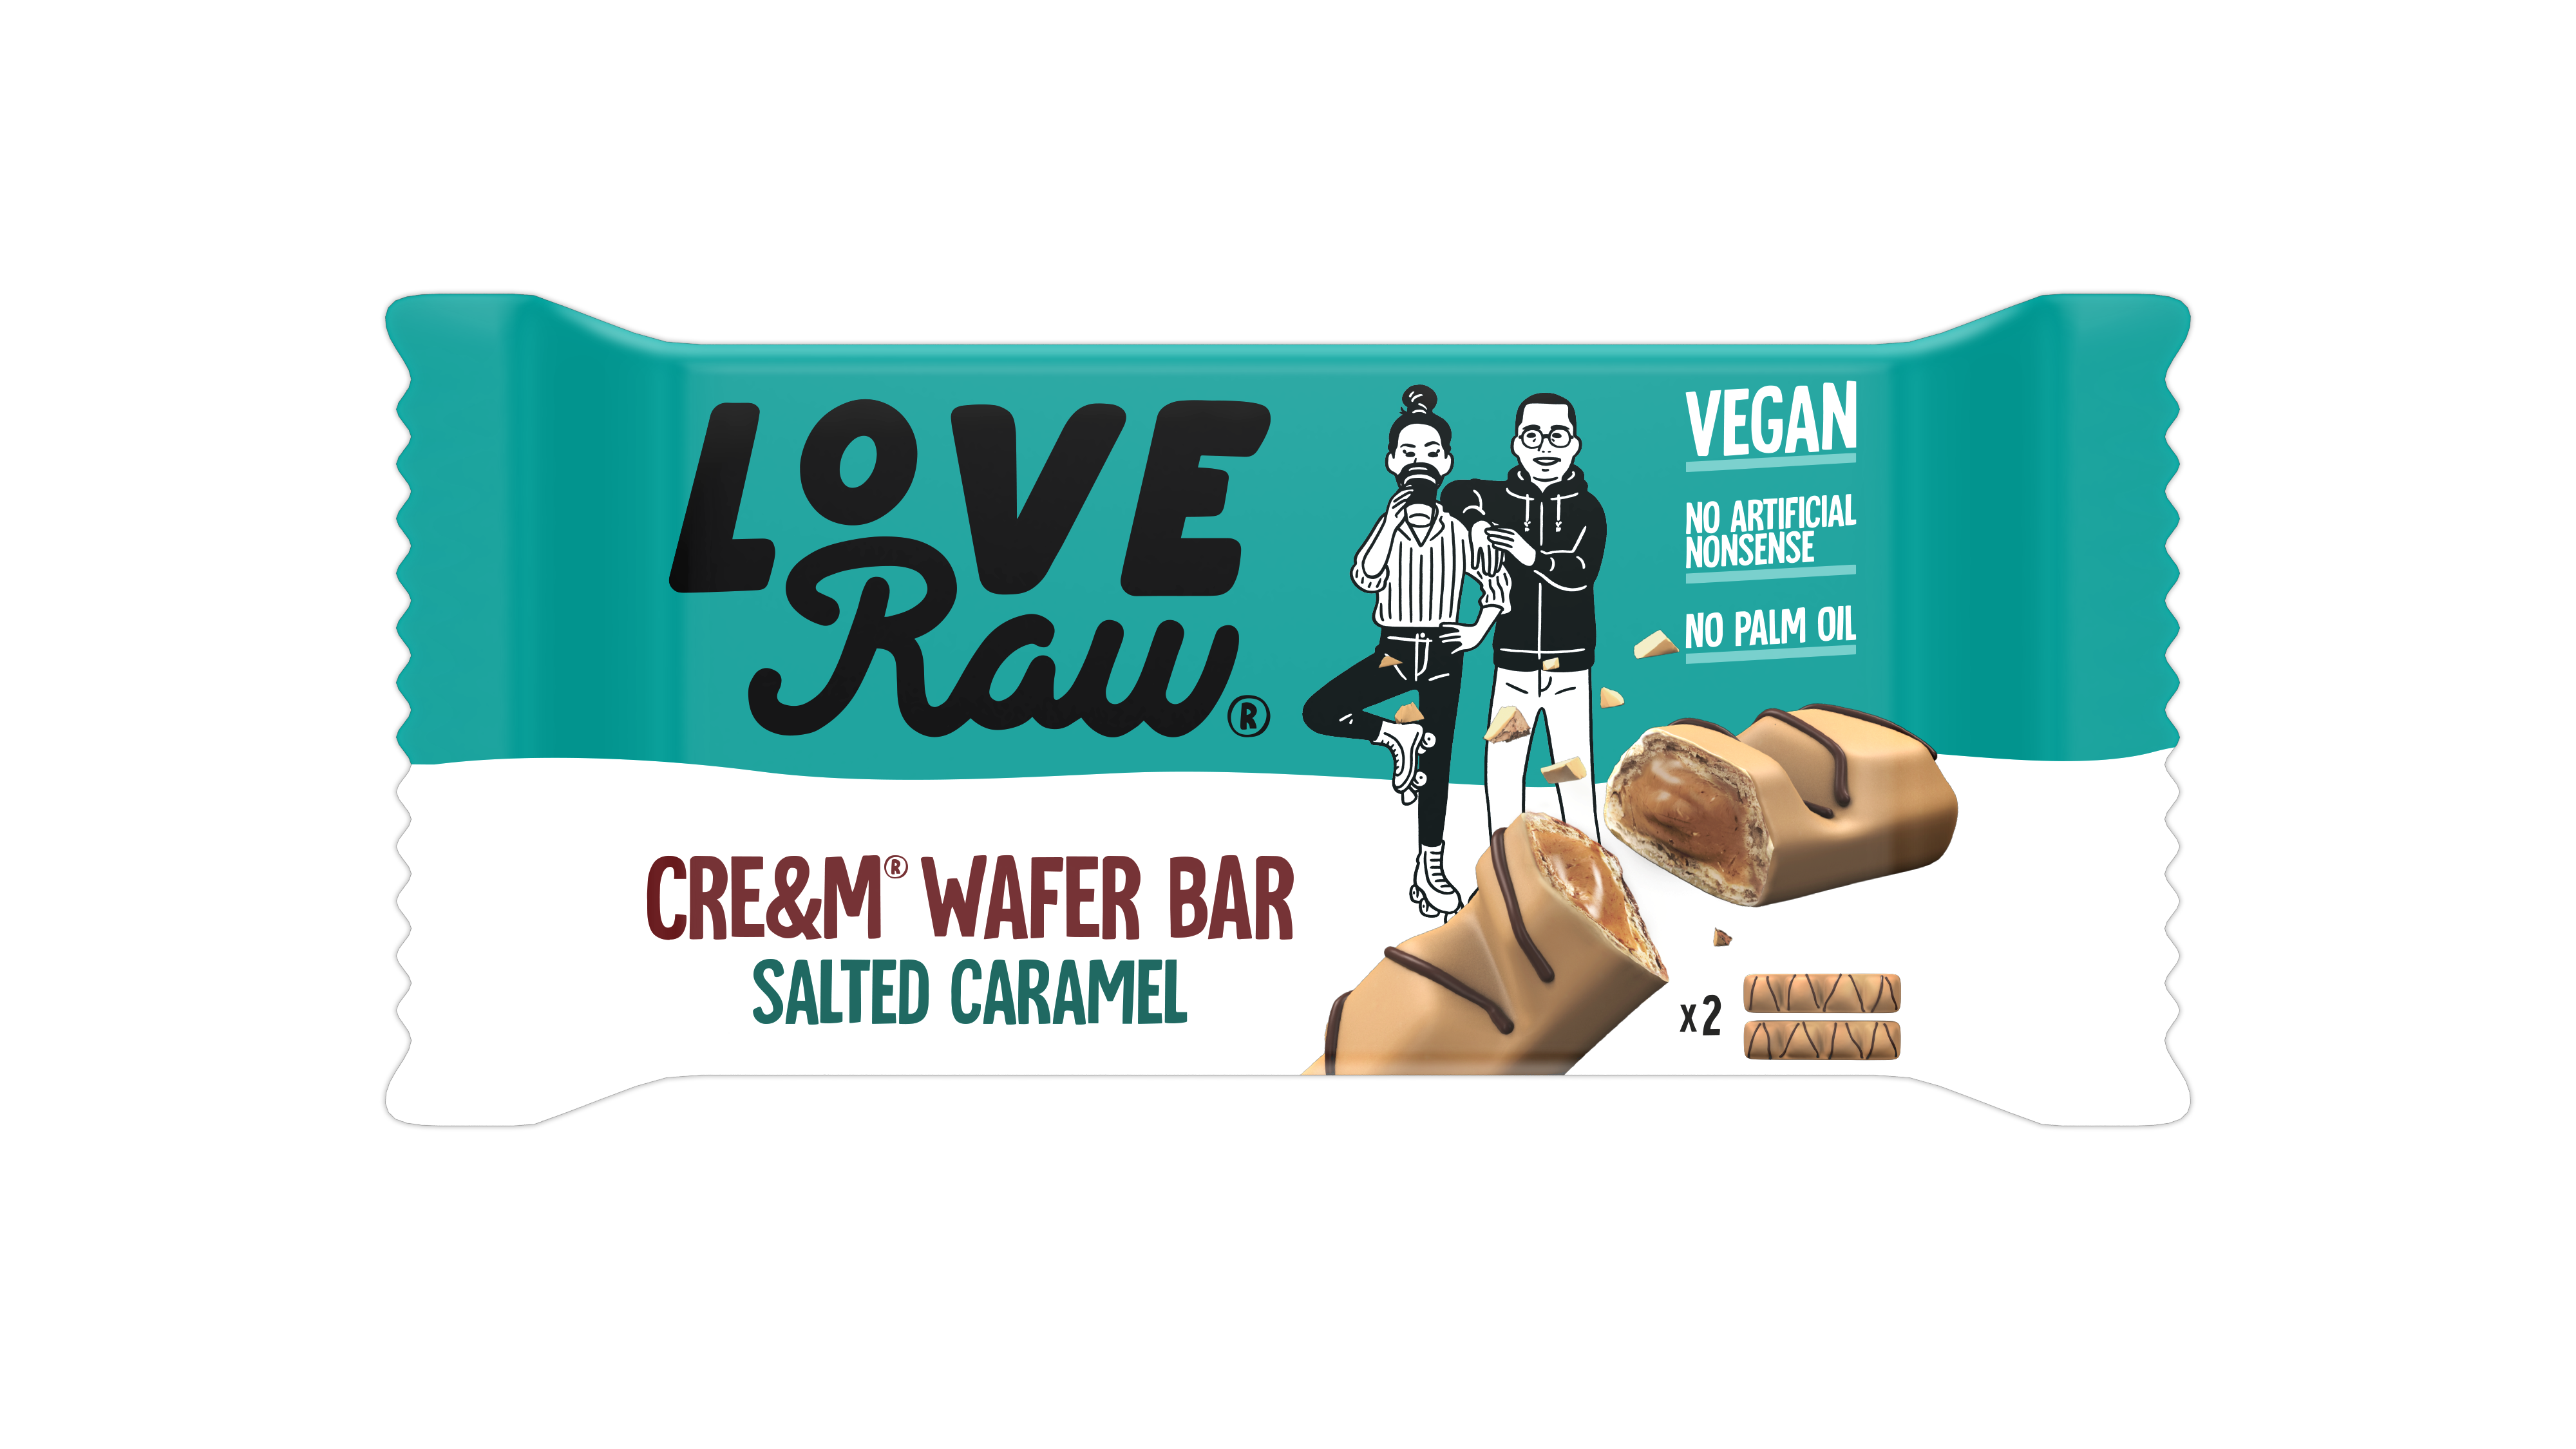 LoveRaw launches vegan salted caramel cre&m wafer bar